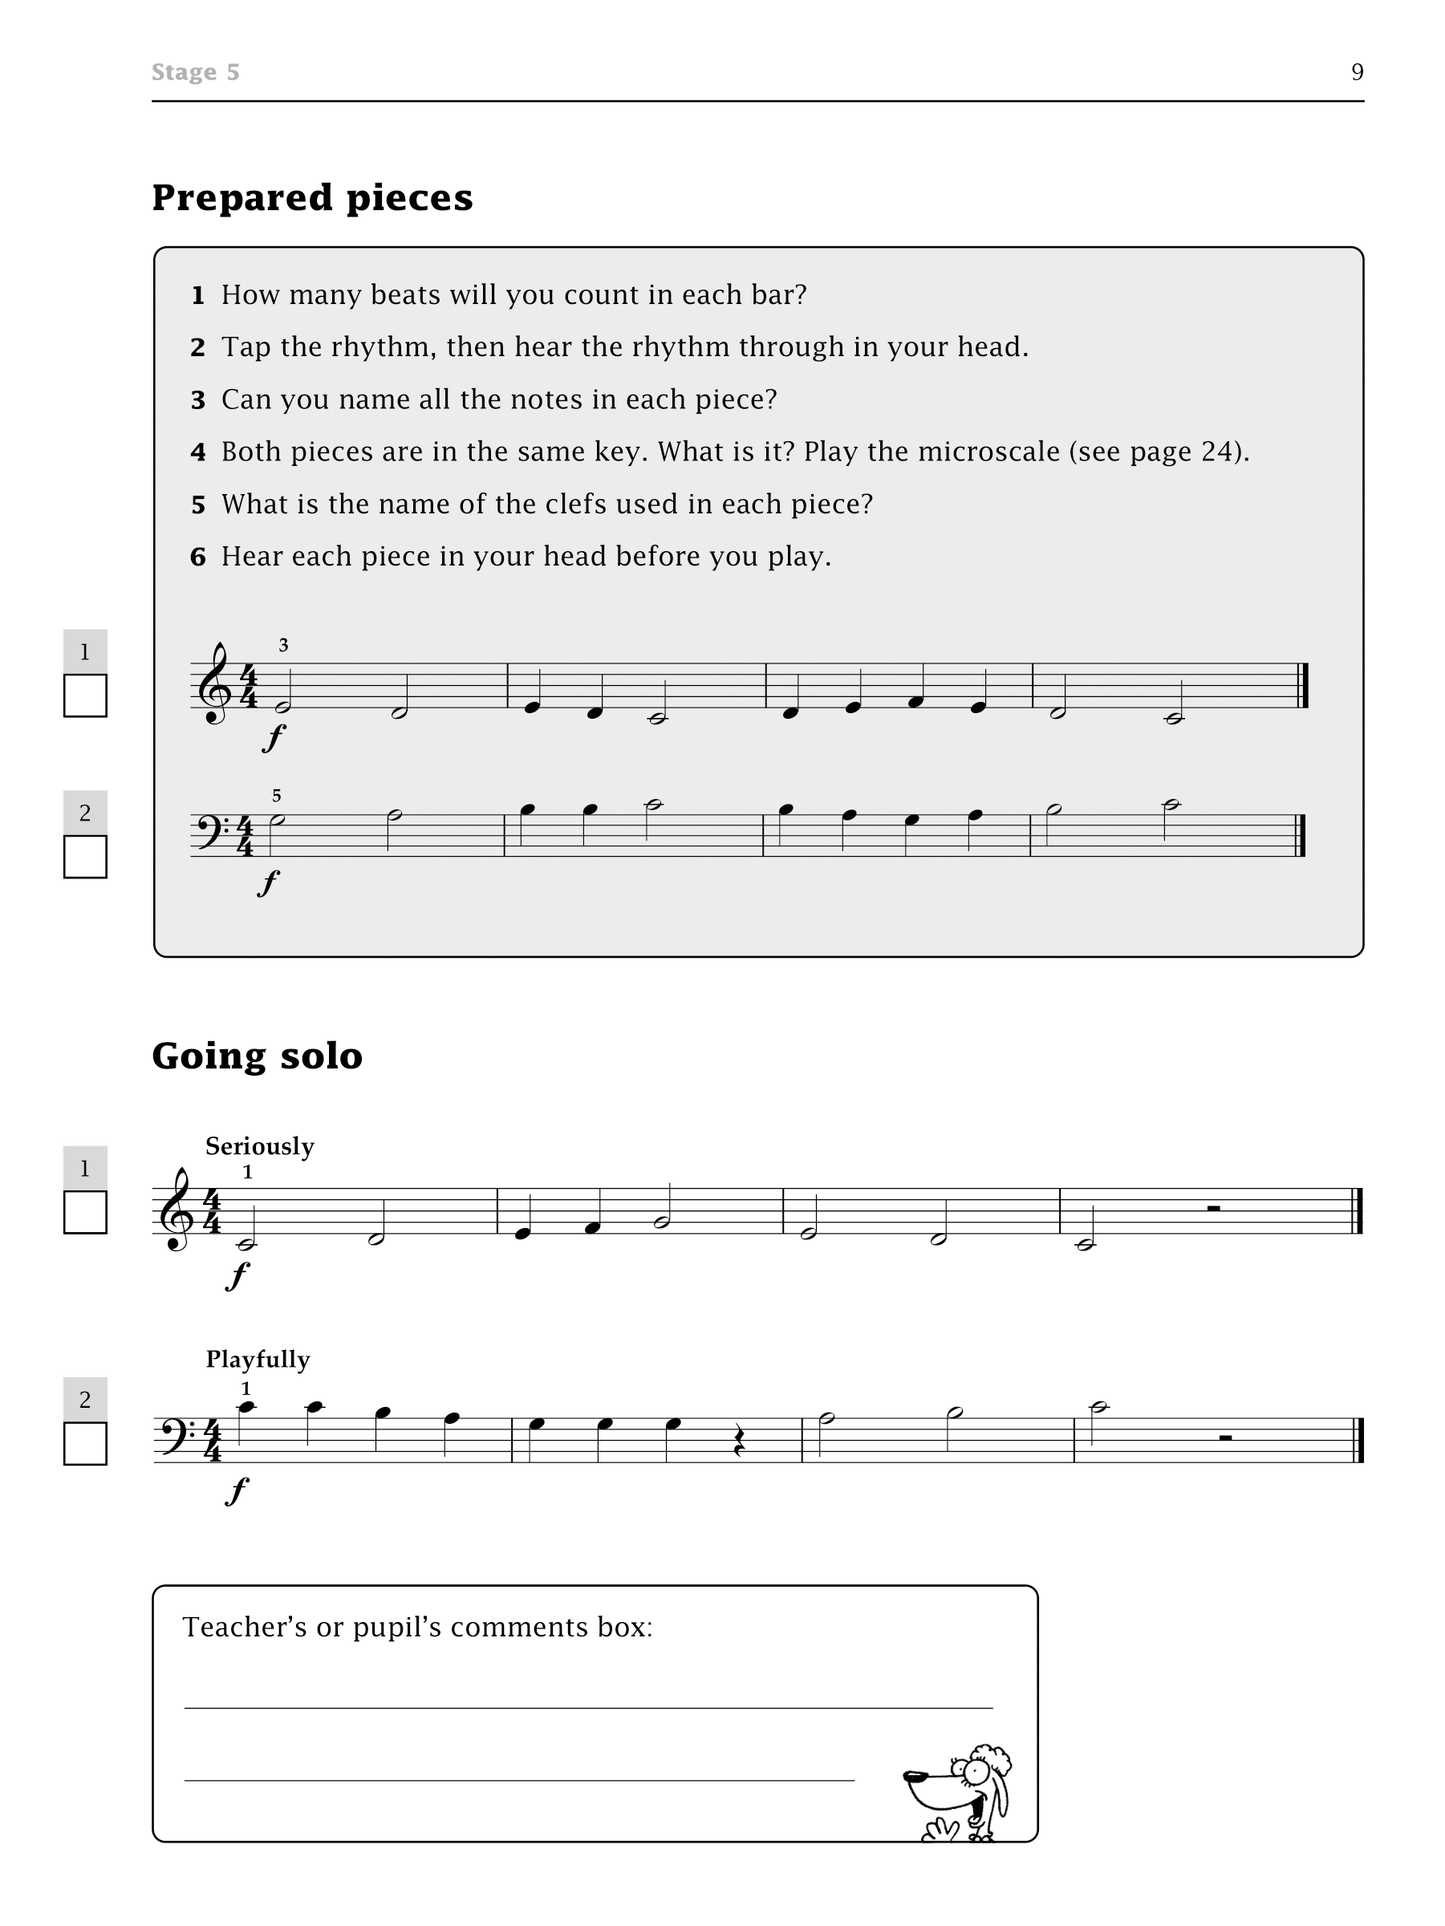 Improve Your Sight Reading - Piano Initial Grade Book